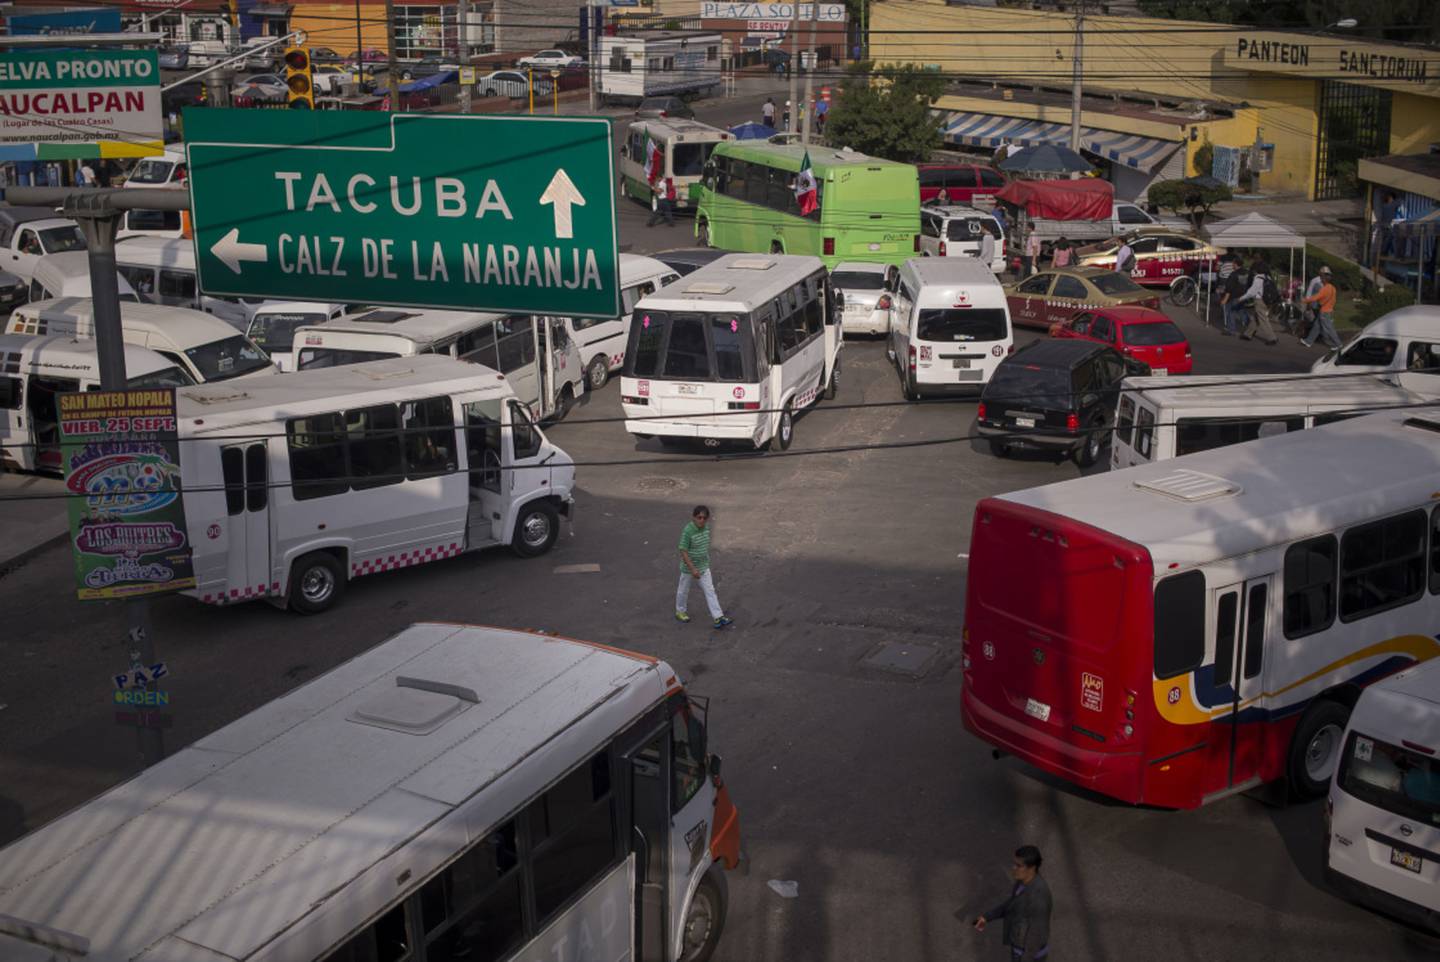 Buses gather at the Cuatro Caminos Metro station in Mexico City, Mexico, on Wednesday, Sept. 9, 2015. Mexico City has the second-largest metro system in North America after New York, with 12 lines and 195 stations serving a population of 20.1 million people in the metropolitan area. Photographer: Christian Rodriguez/Bloombergdfd